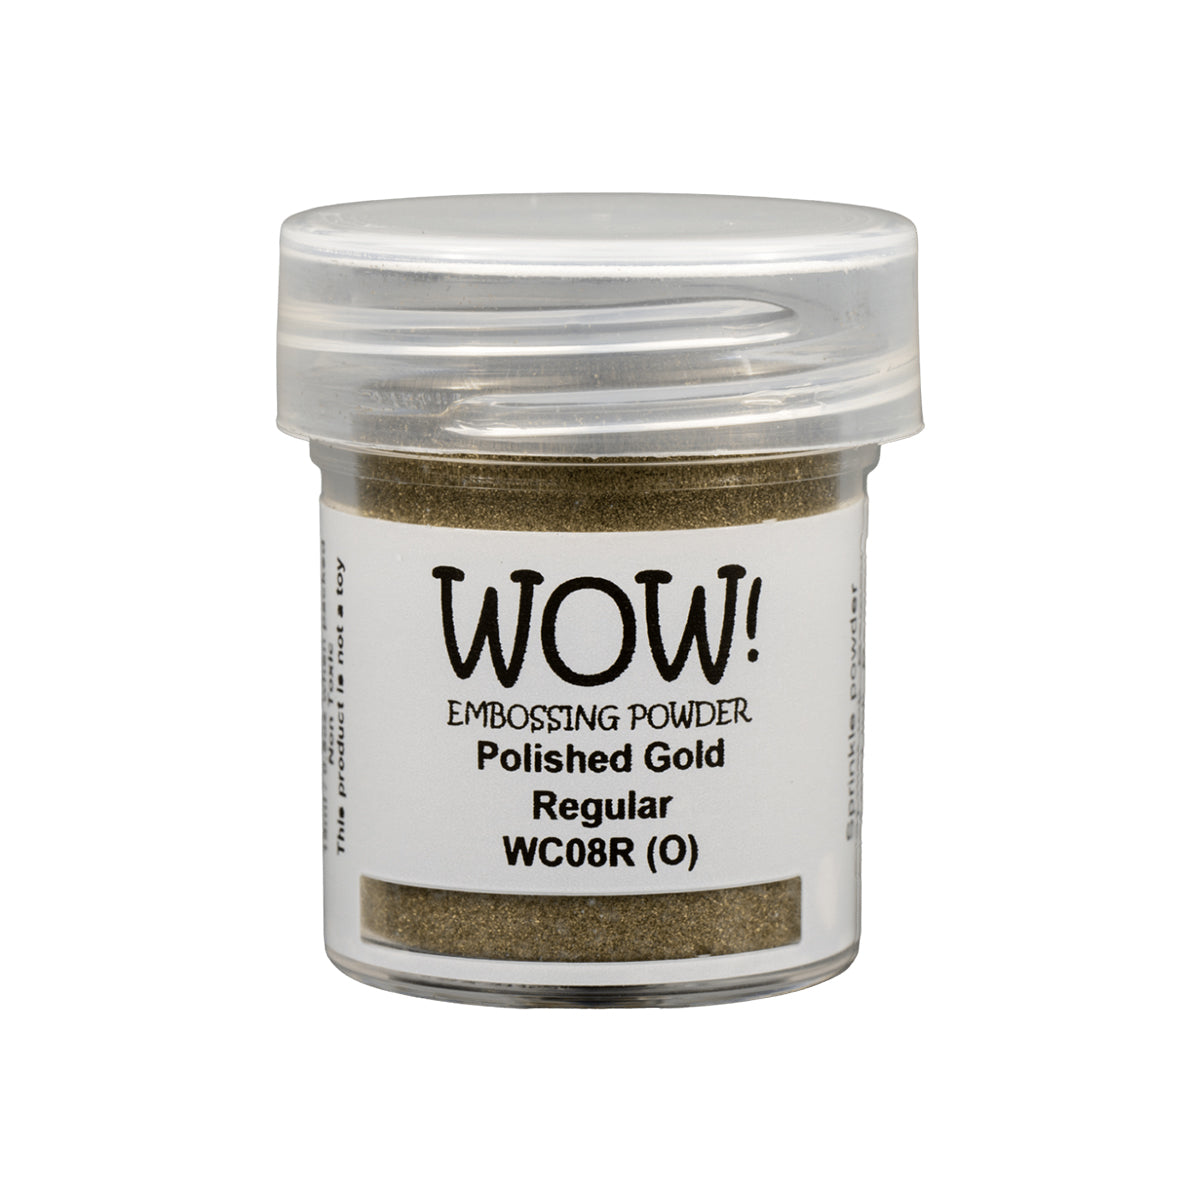 Wow! Embossing Powder - Polished Gold